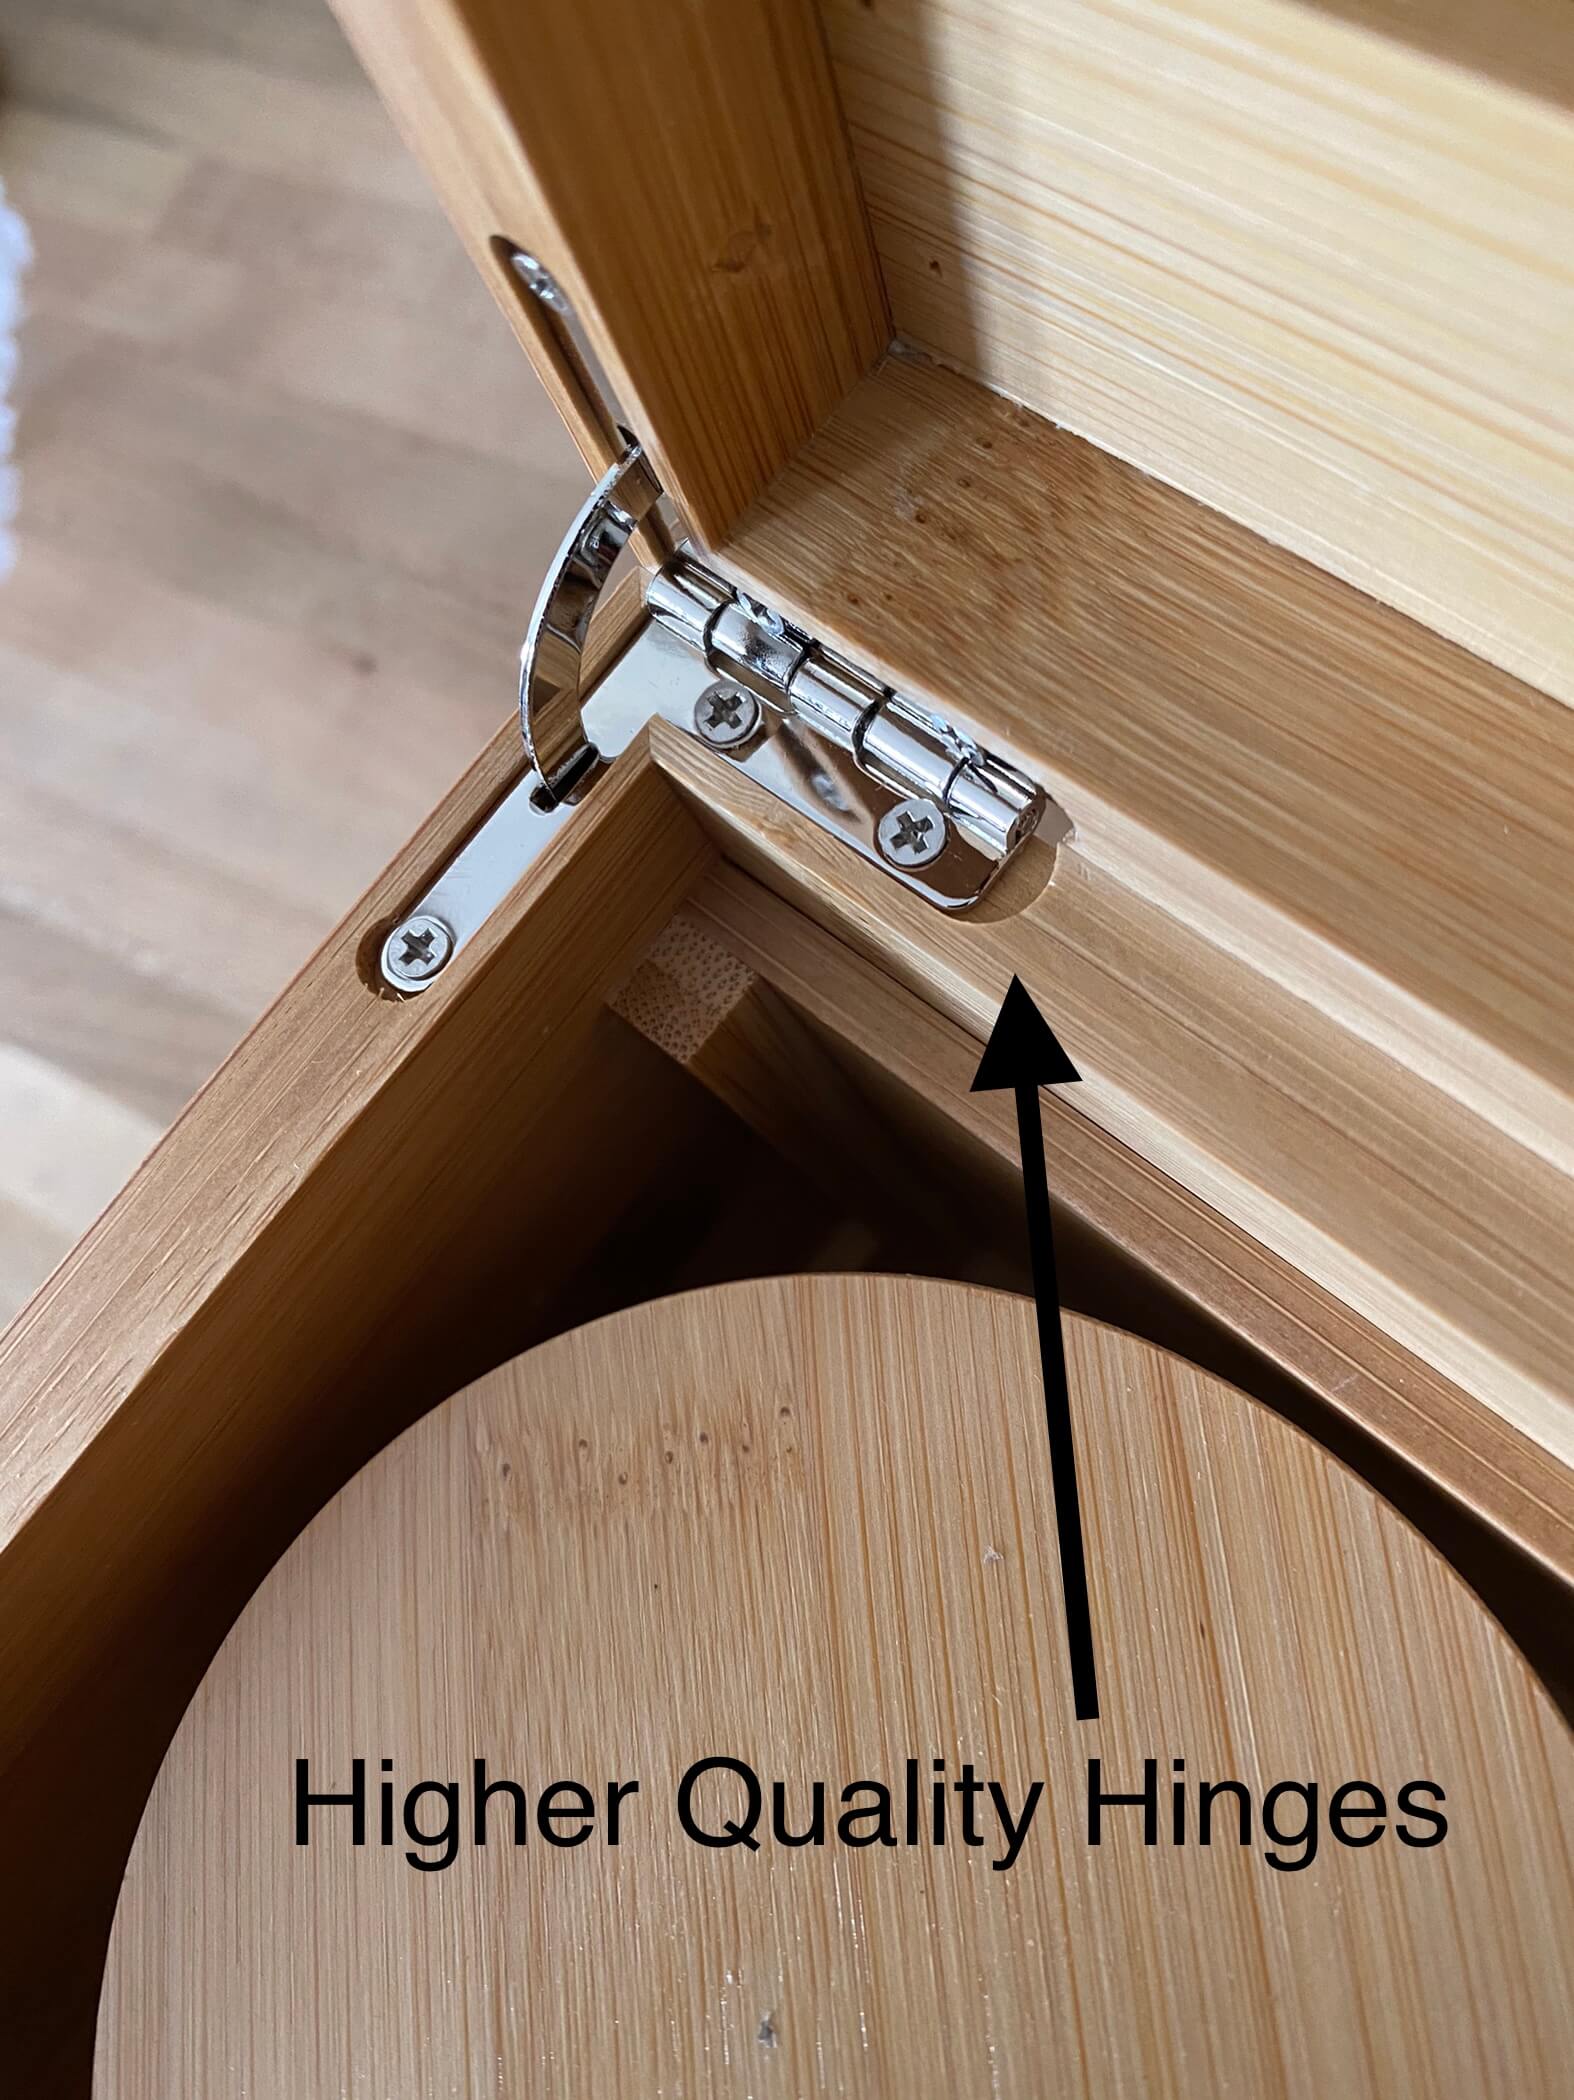 Our extra large Bzz Box showcasing the upgraded higher quality hinges.